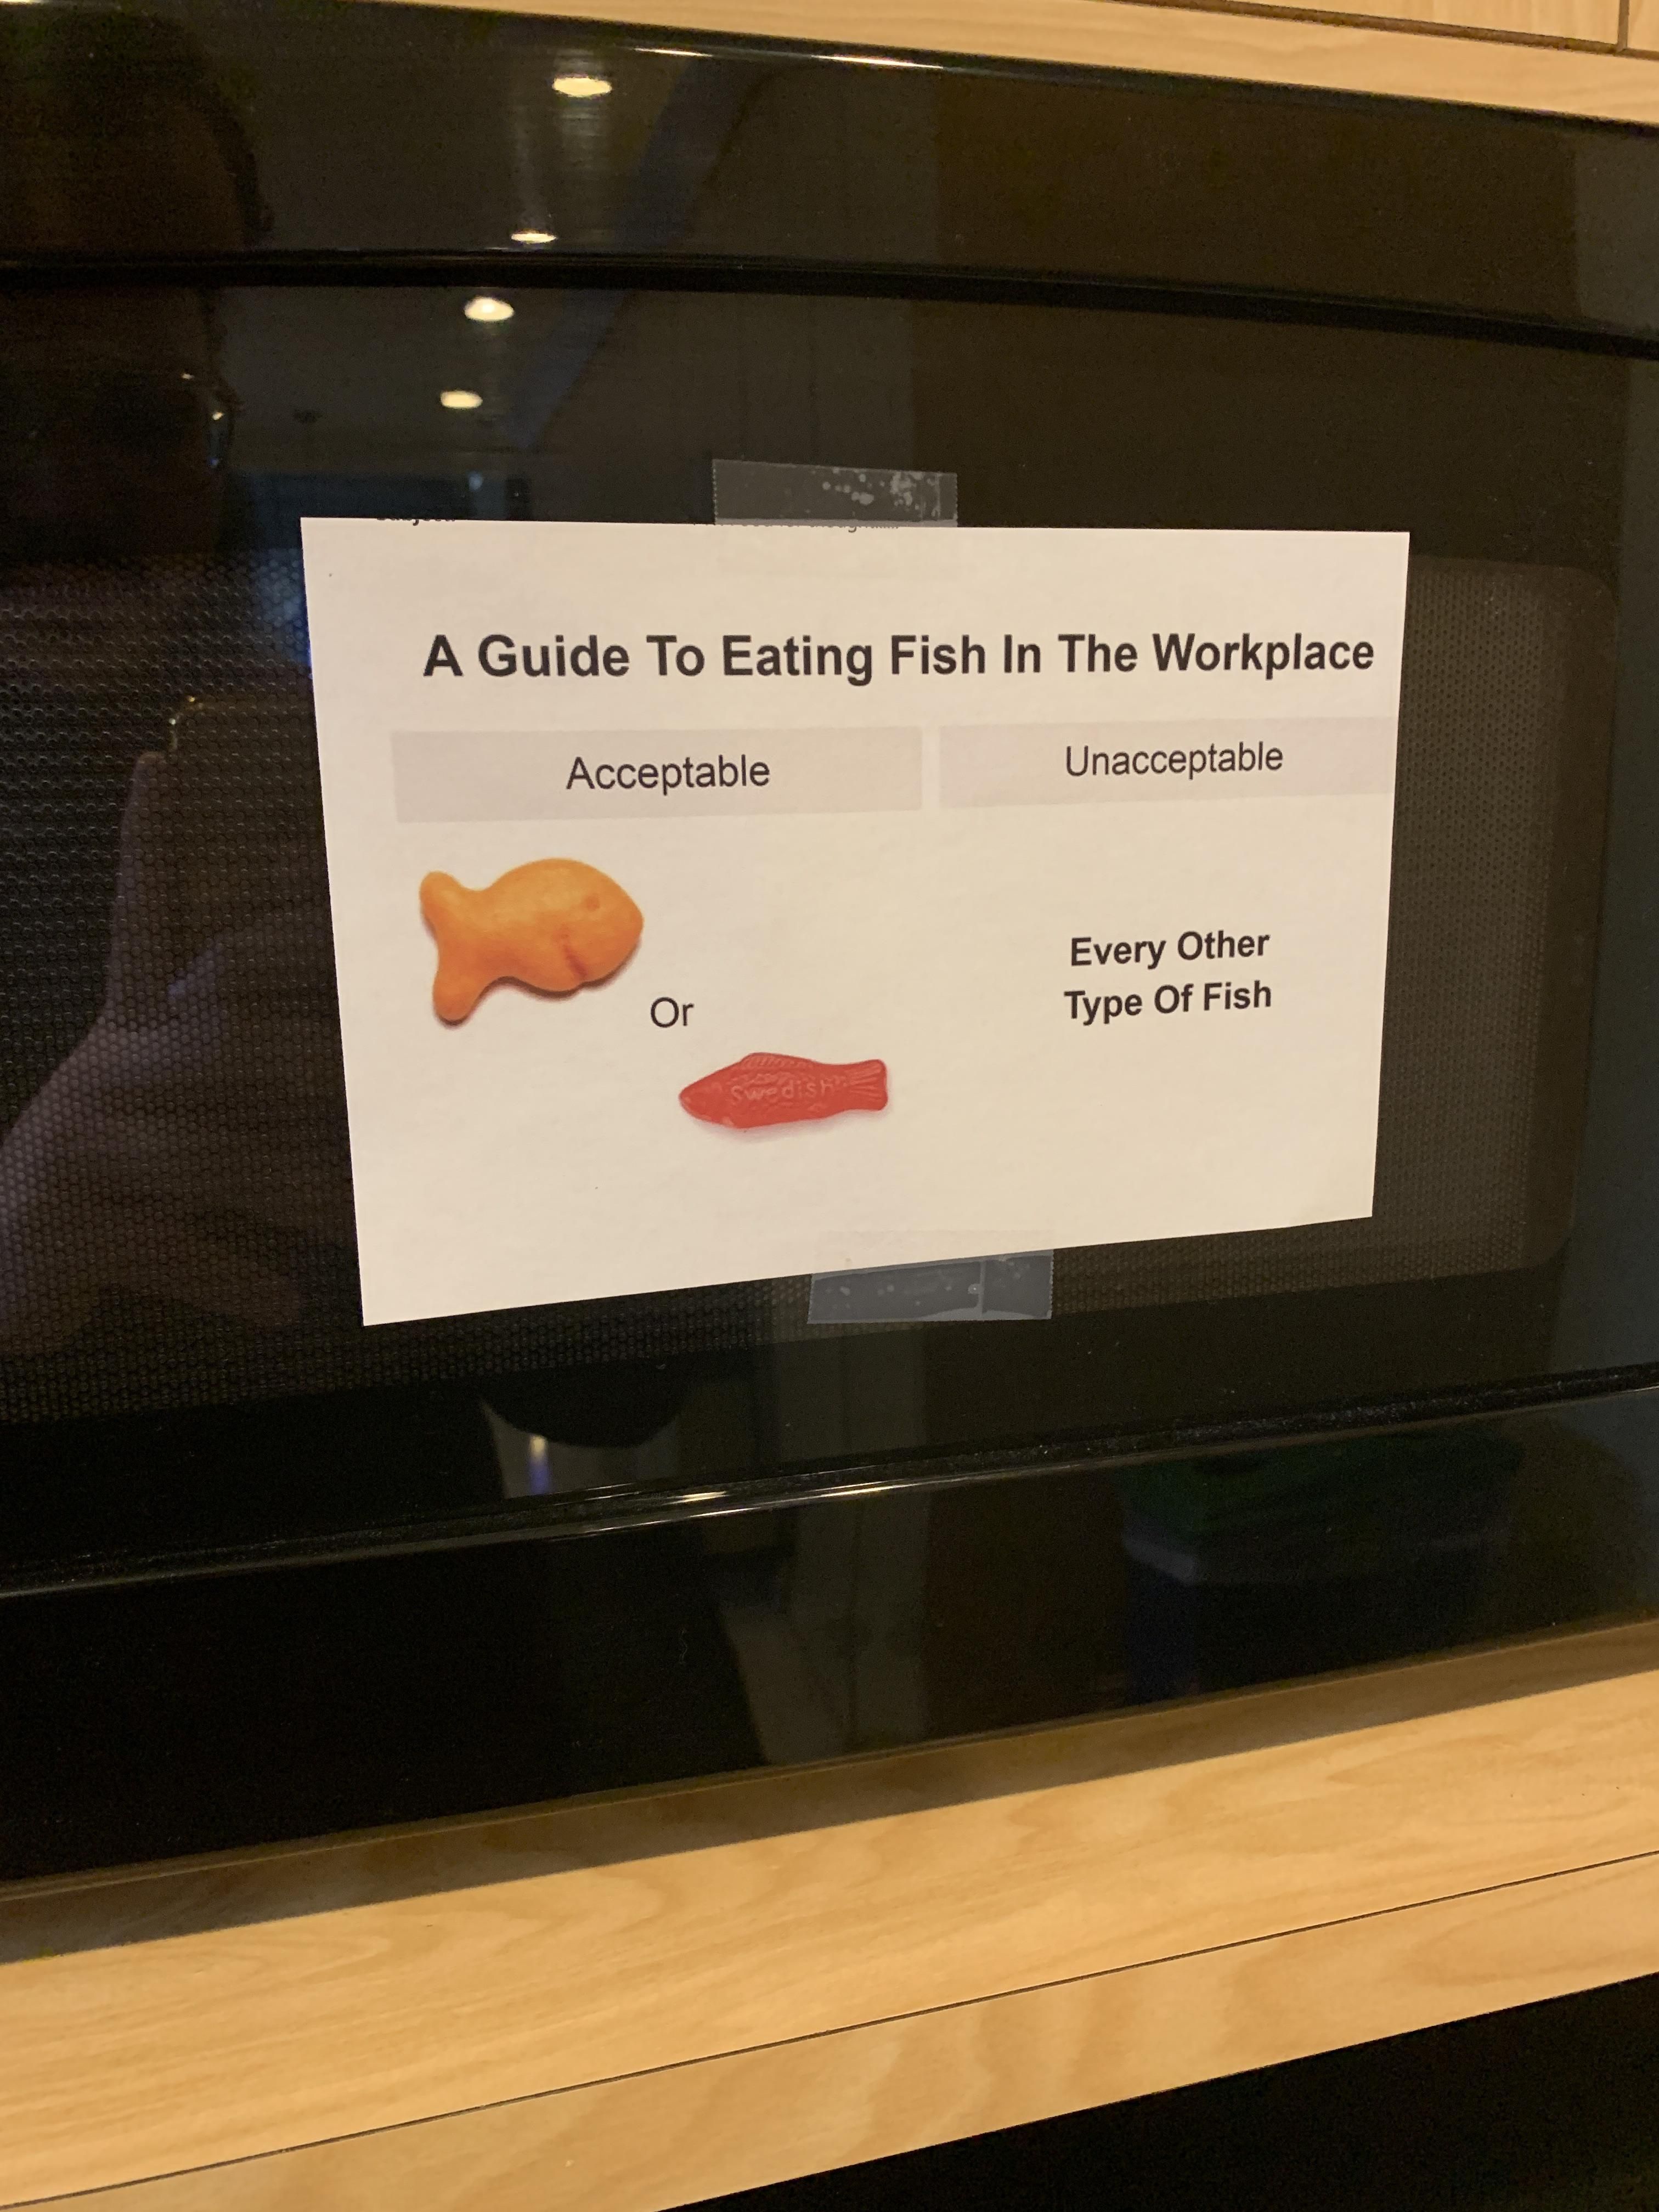 Only Gold and Swedish fish are acceptable in the workplace